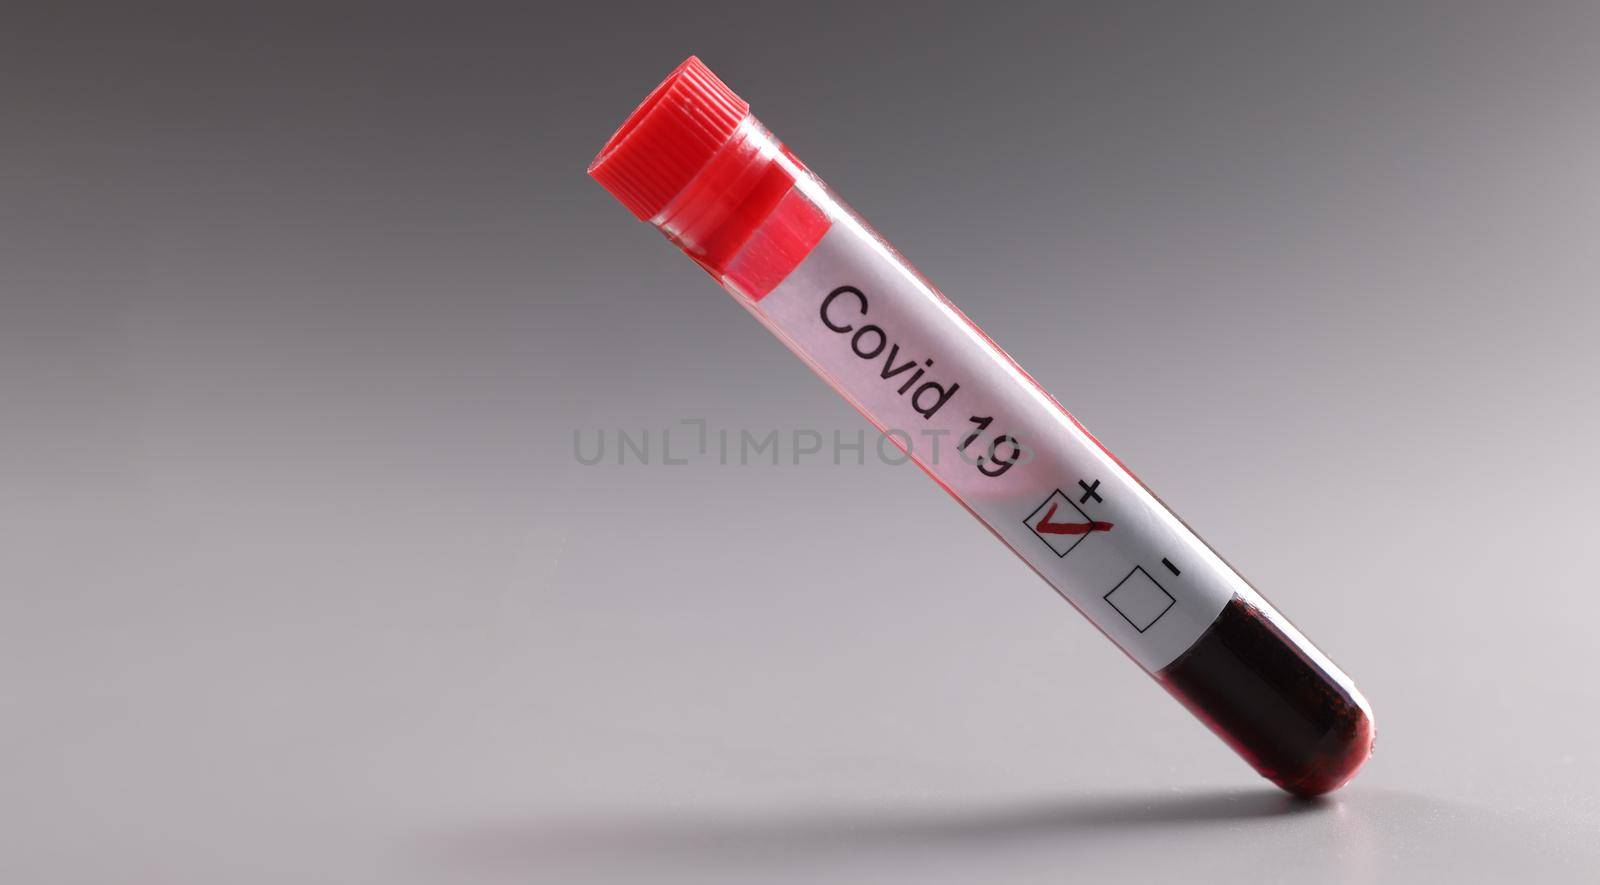 Positive test for covid in vitro. Infected patient with blood sample concept